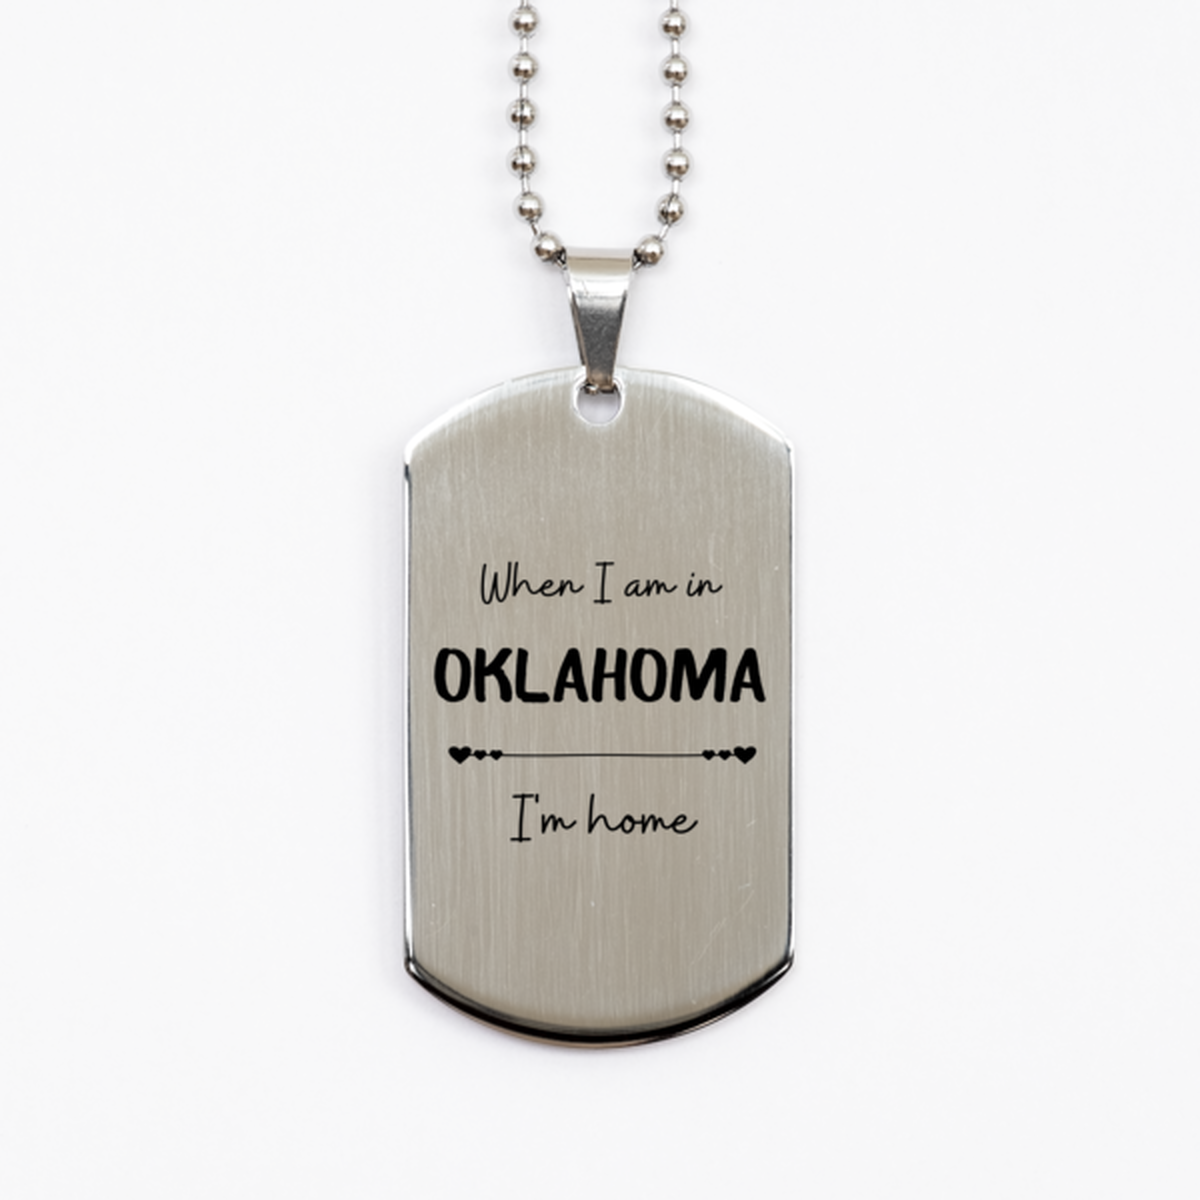 When I am in Oklahoma I'm home Silver Dog Tag, Cheap Gifts For Oklahoma, State Oklahoma Birthday Gifts for Friends Coworker